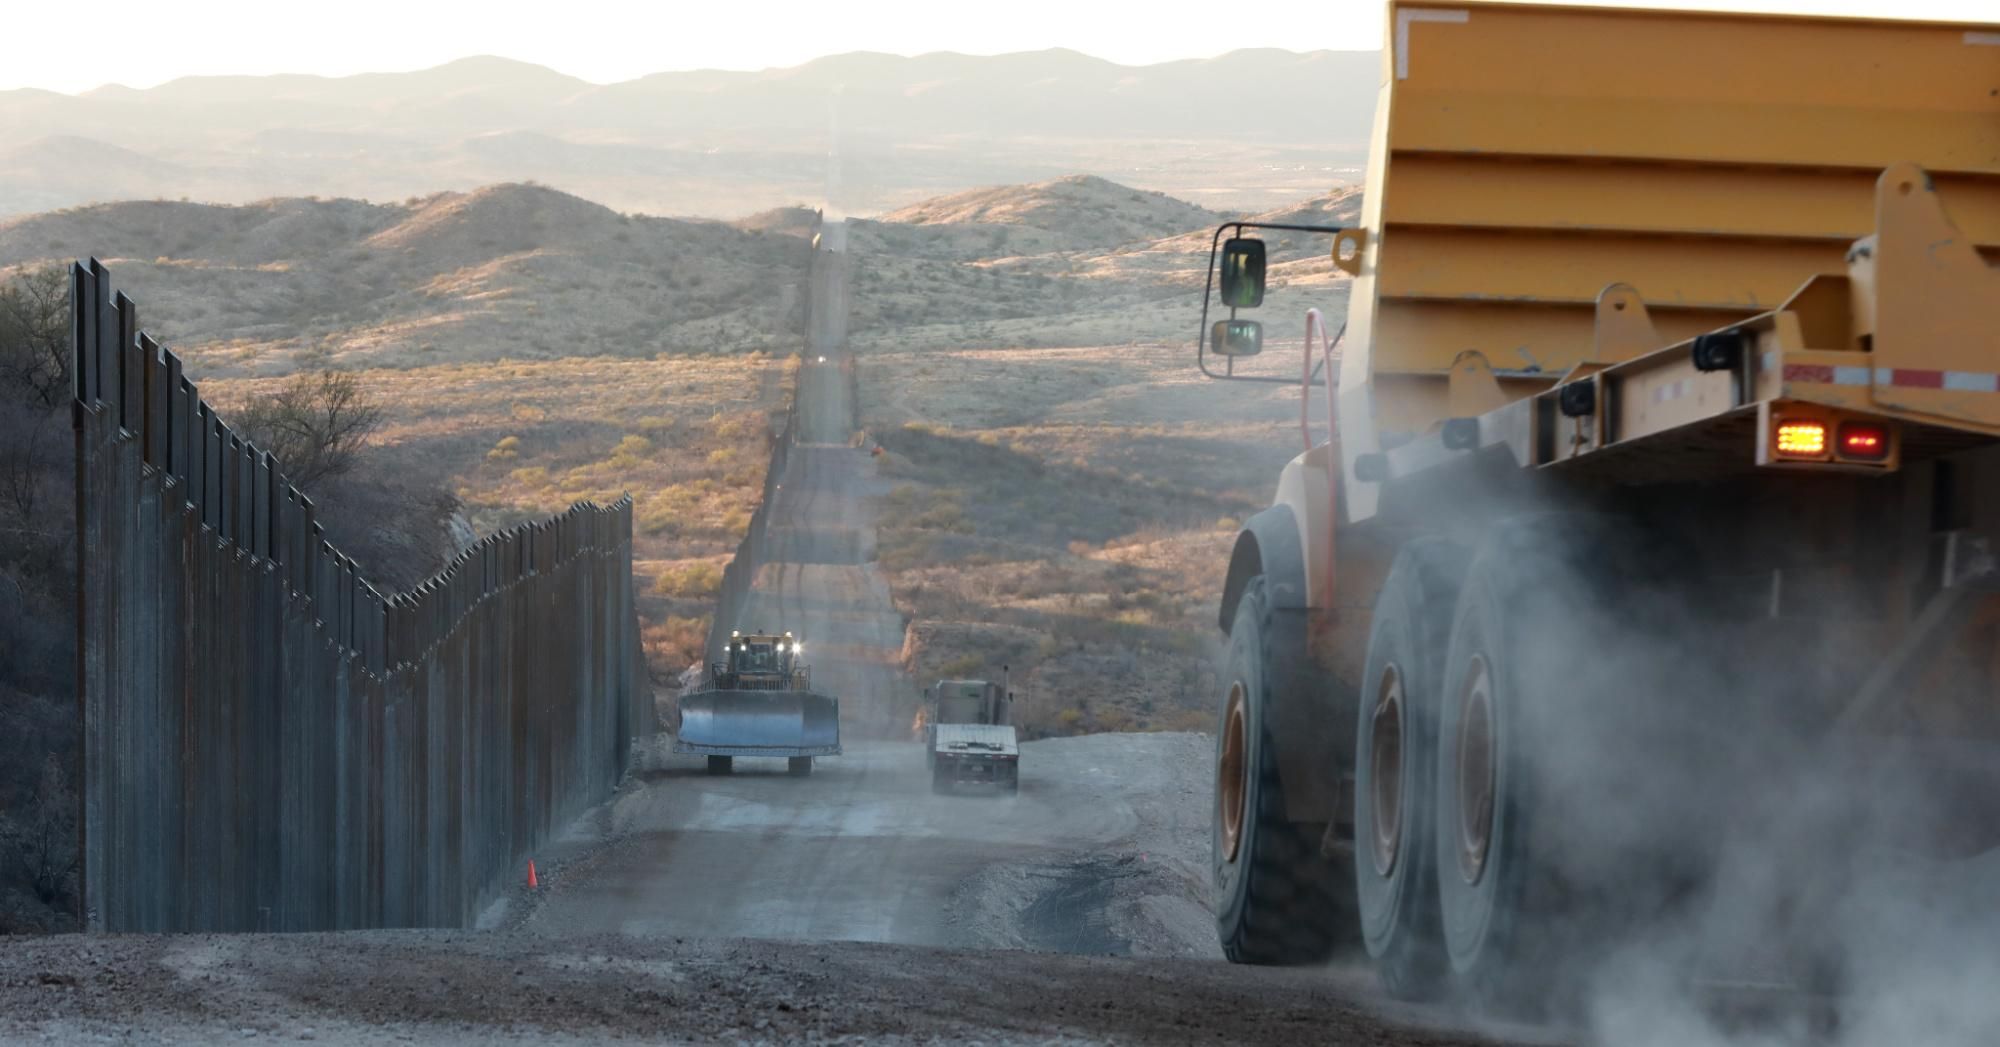 Construction championed by then-President Donald Trump continued on a wall along the U.S.-Mexico border on January 12, 2021 in Sasabe, Arizona. (Photo: Micah Garen/Getty Images)